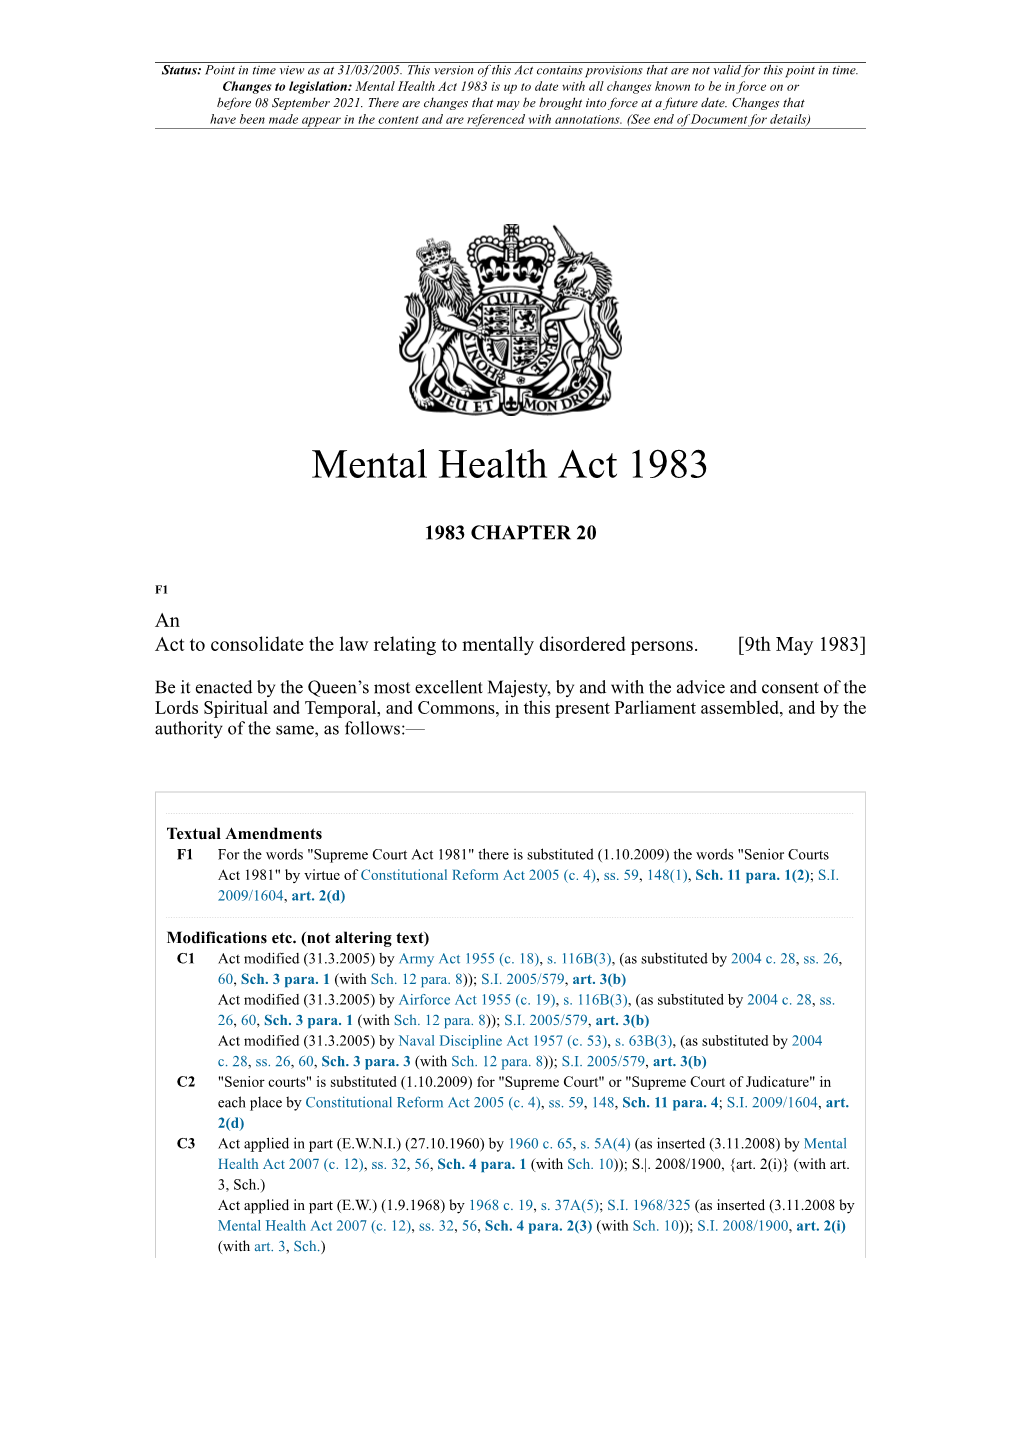 Mental Health Act 1983 Is up to Date with All Changes Known to Be in Force on Or Before 08 September 2021